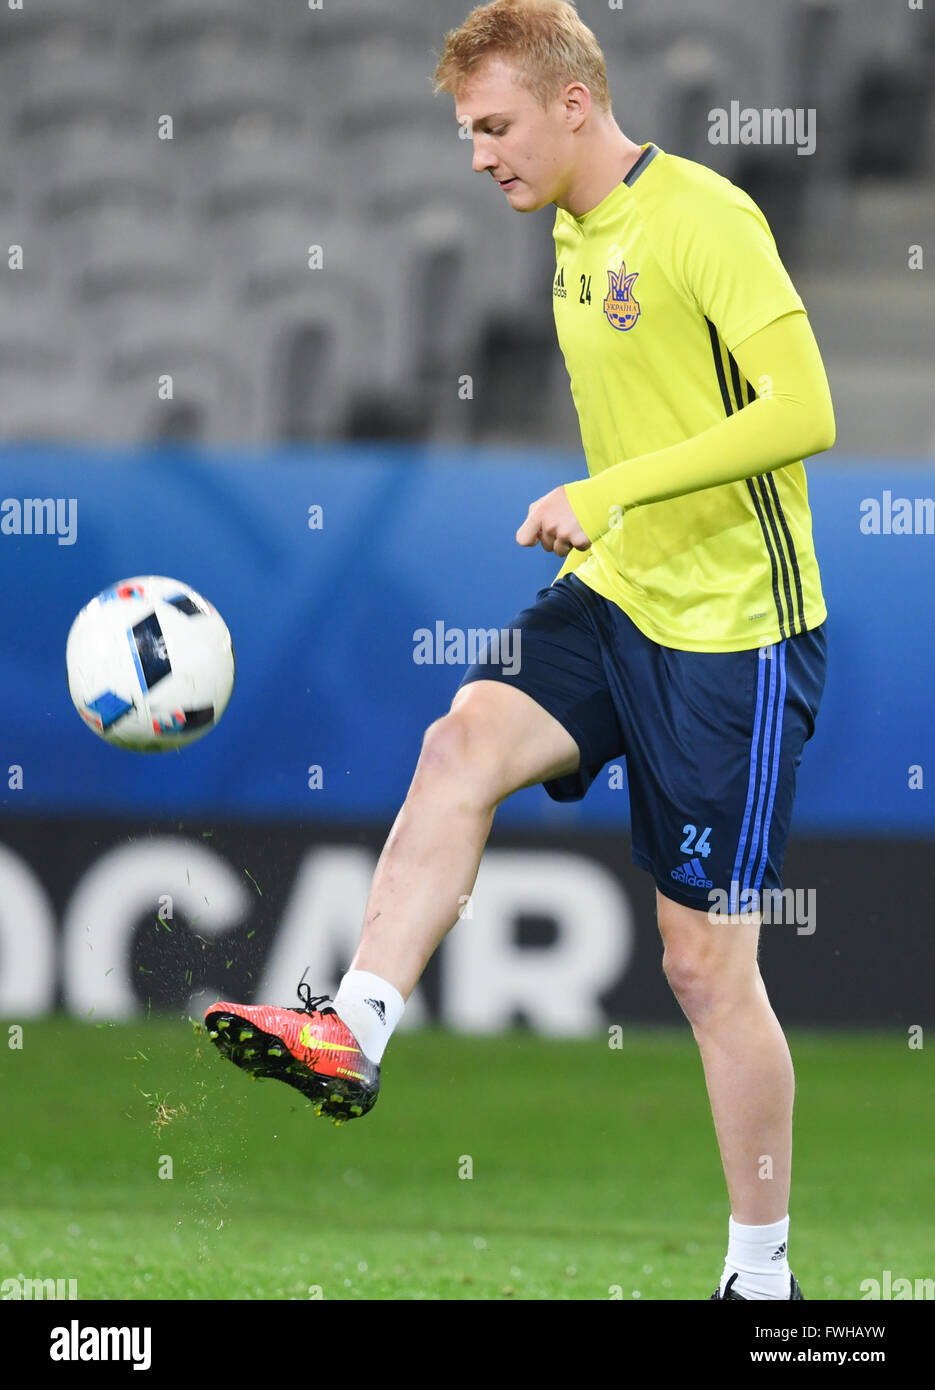 Viktor Kovalenko of Ukraine during a training session at Stade Pierre Mauroy in Lille, France, June 11, 2016. Ukraine will face Germany during the UEFA EURO 2016 on 12 June 2016. Photo: Arne Dedert/dpa Stock Photo